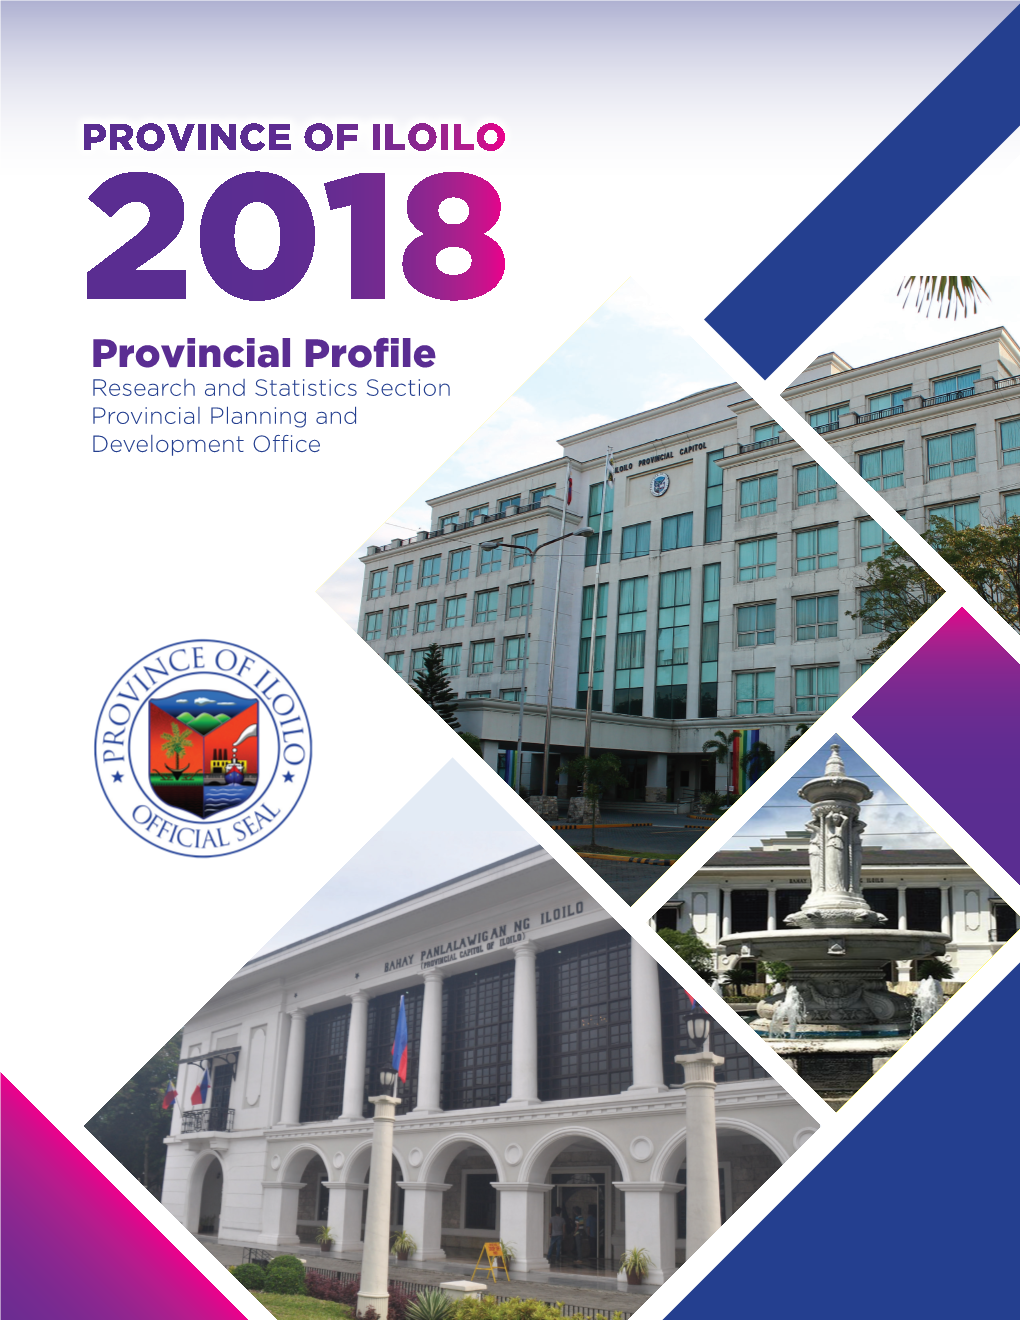 Provincial Profile Research and Statistics Section Provincial Planning and Development Office